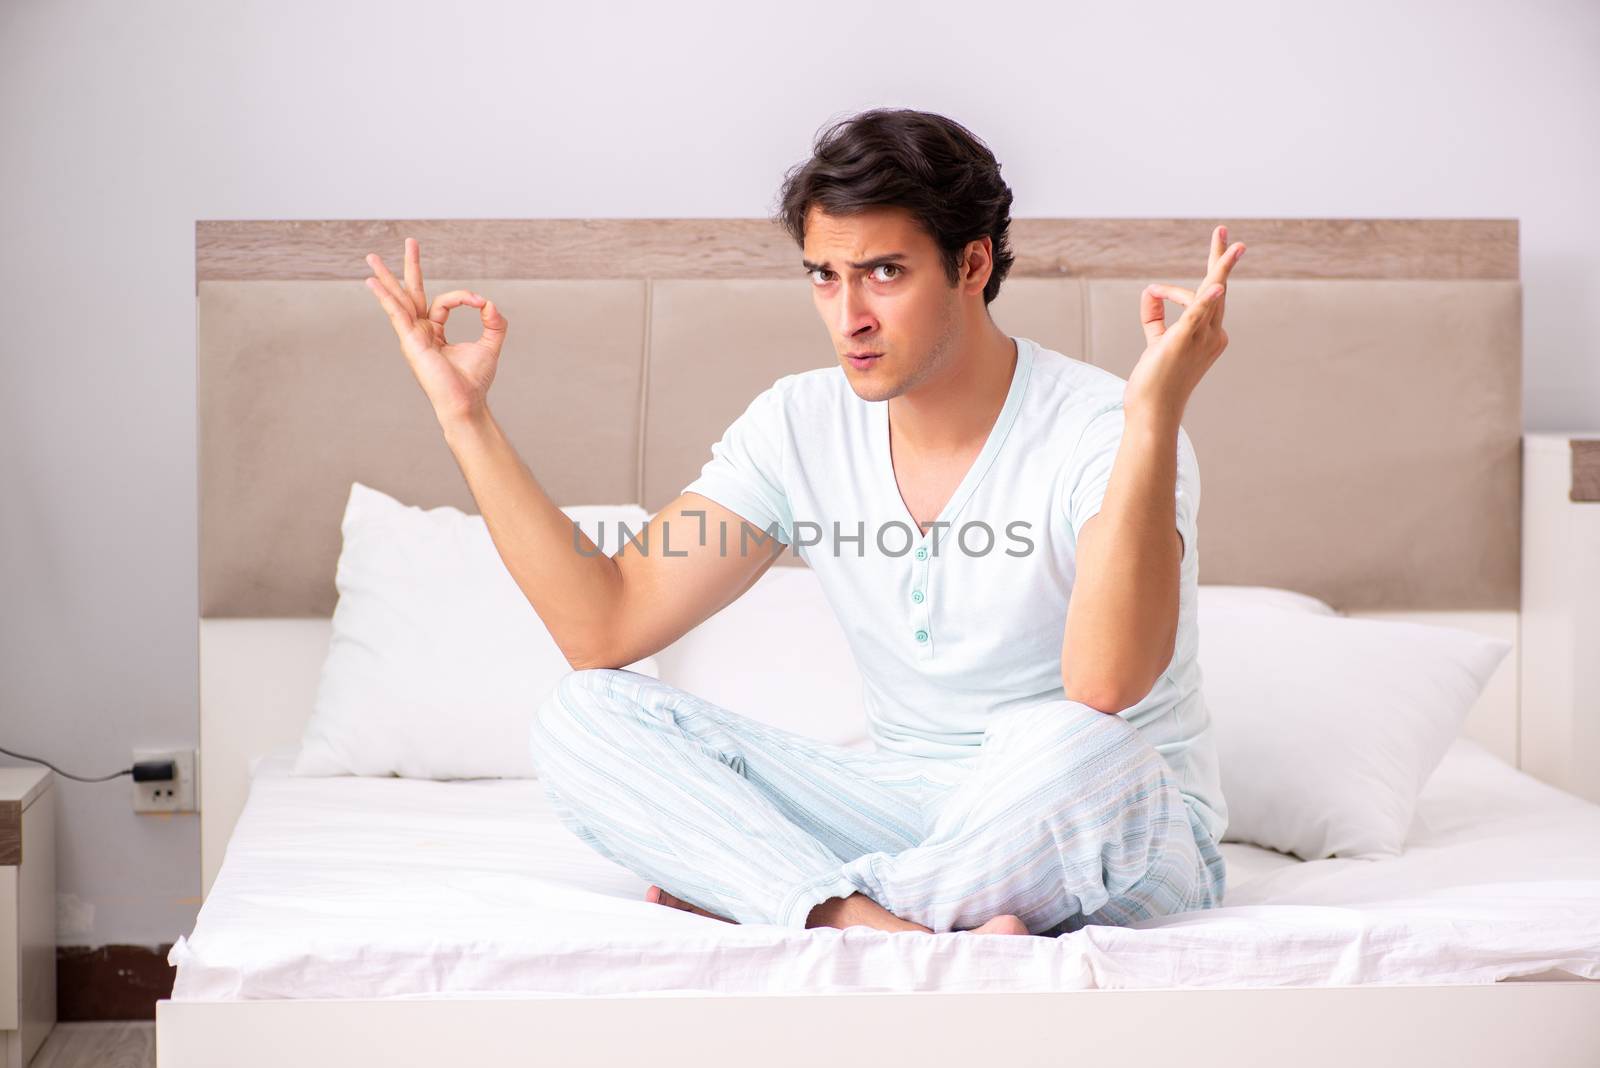 Young man doing yoga in bed